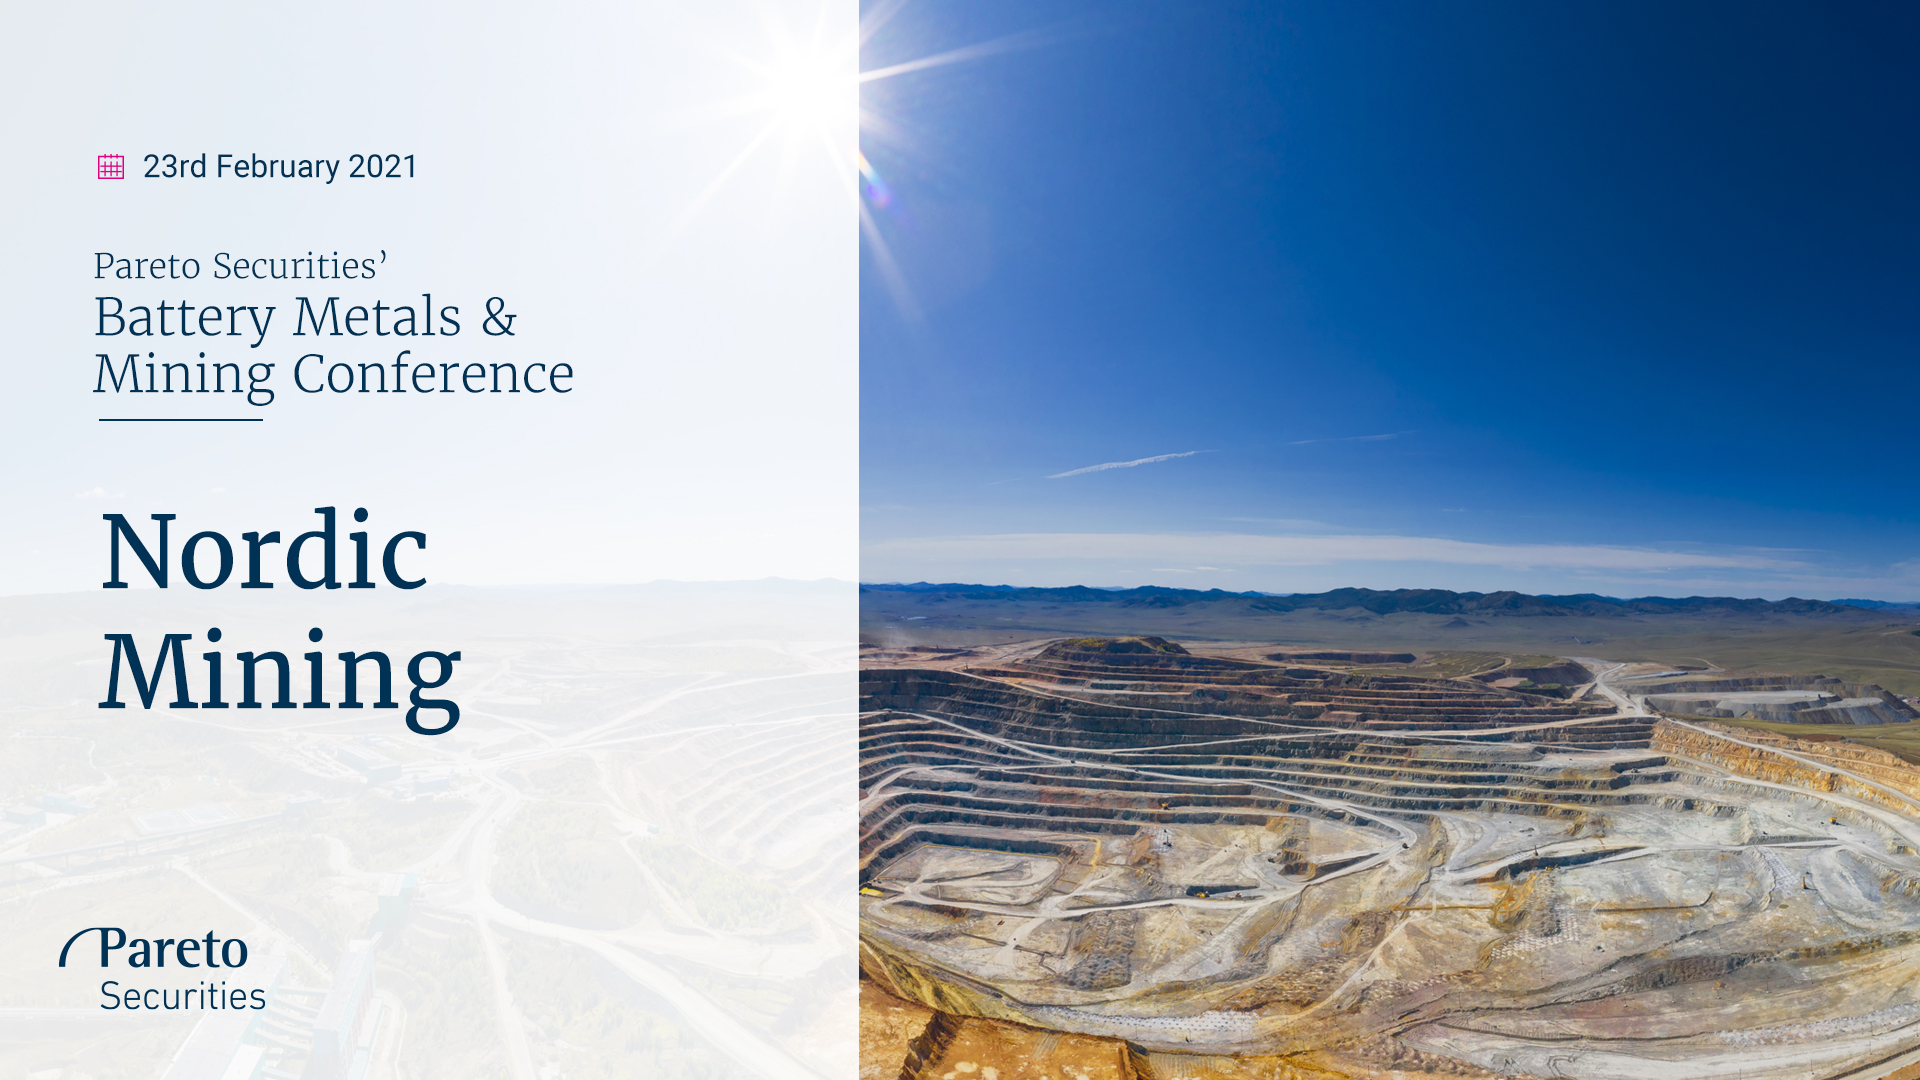 Nordic Mining / Pareto Securities' Battery Metals & Mining Conference